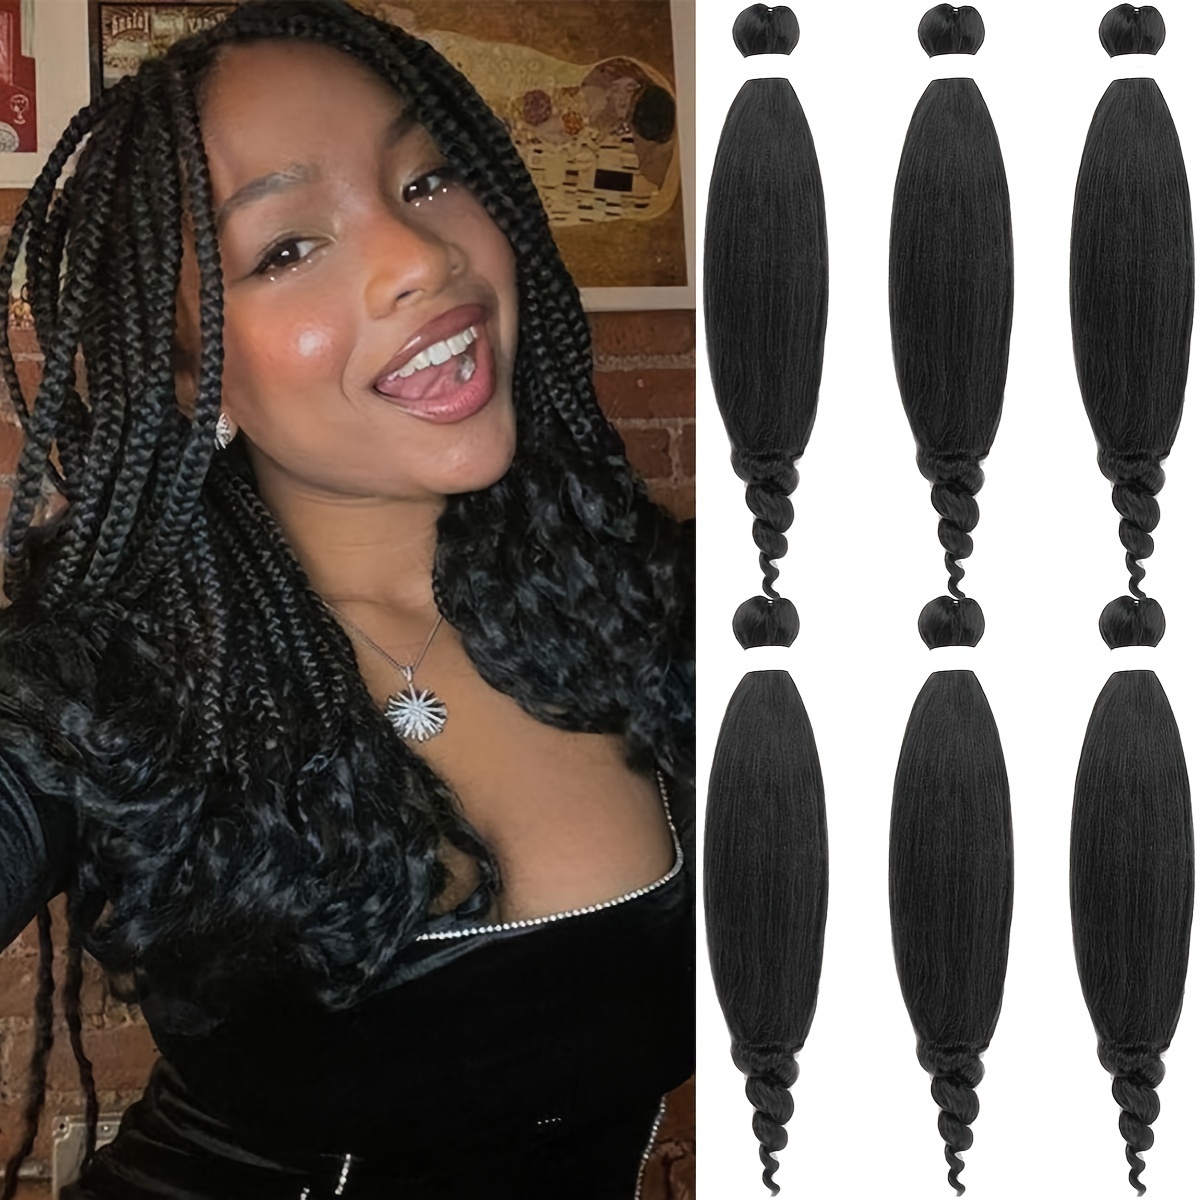 𝗚𝗲𝗺𝗶𝗻𝗶  Curly End Pre-stretched Braiding Hair 20-24 Inch